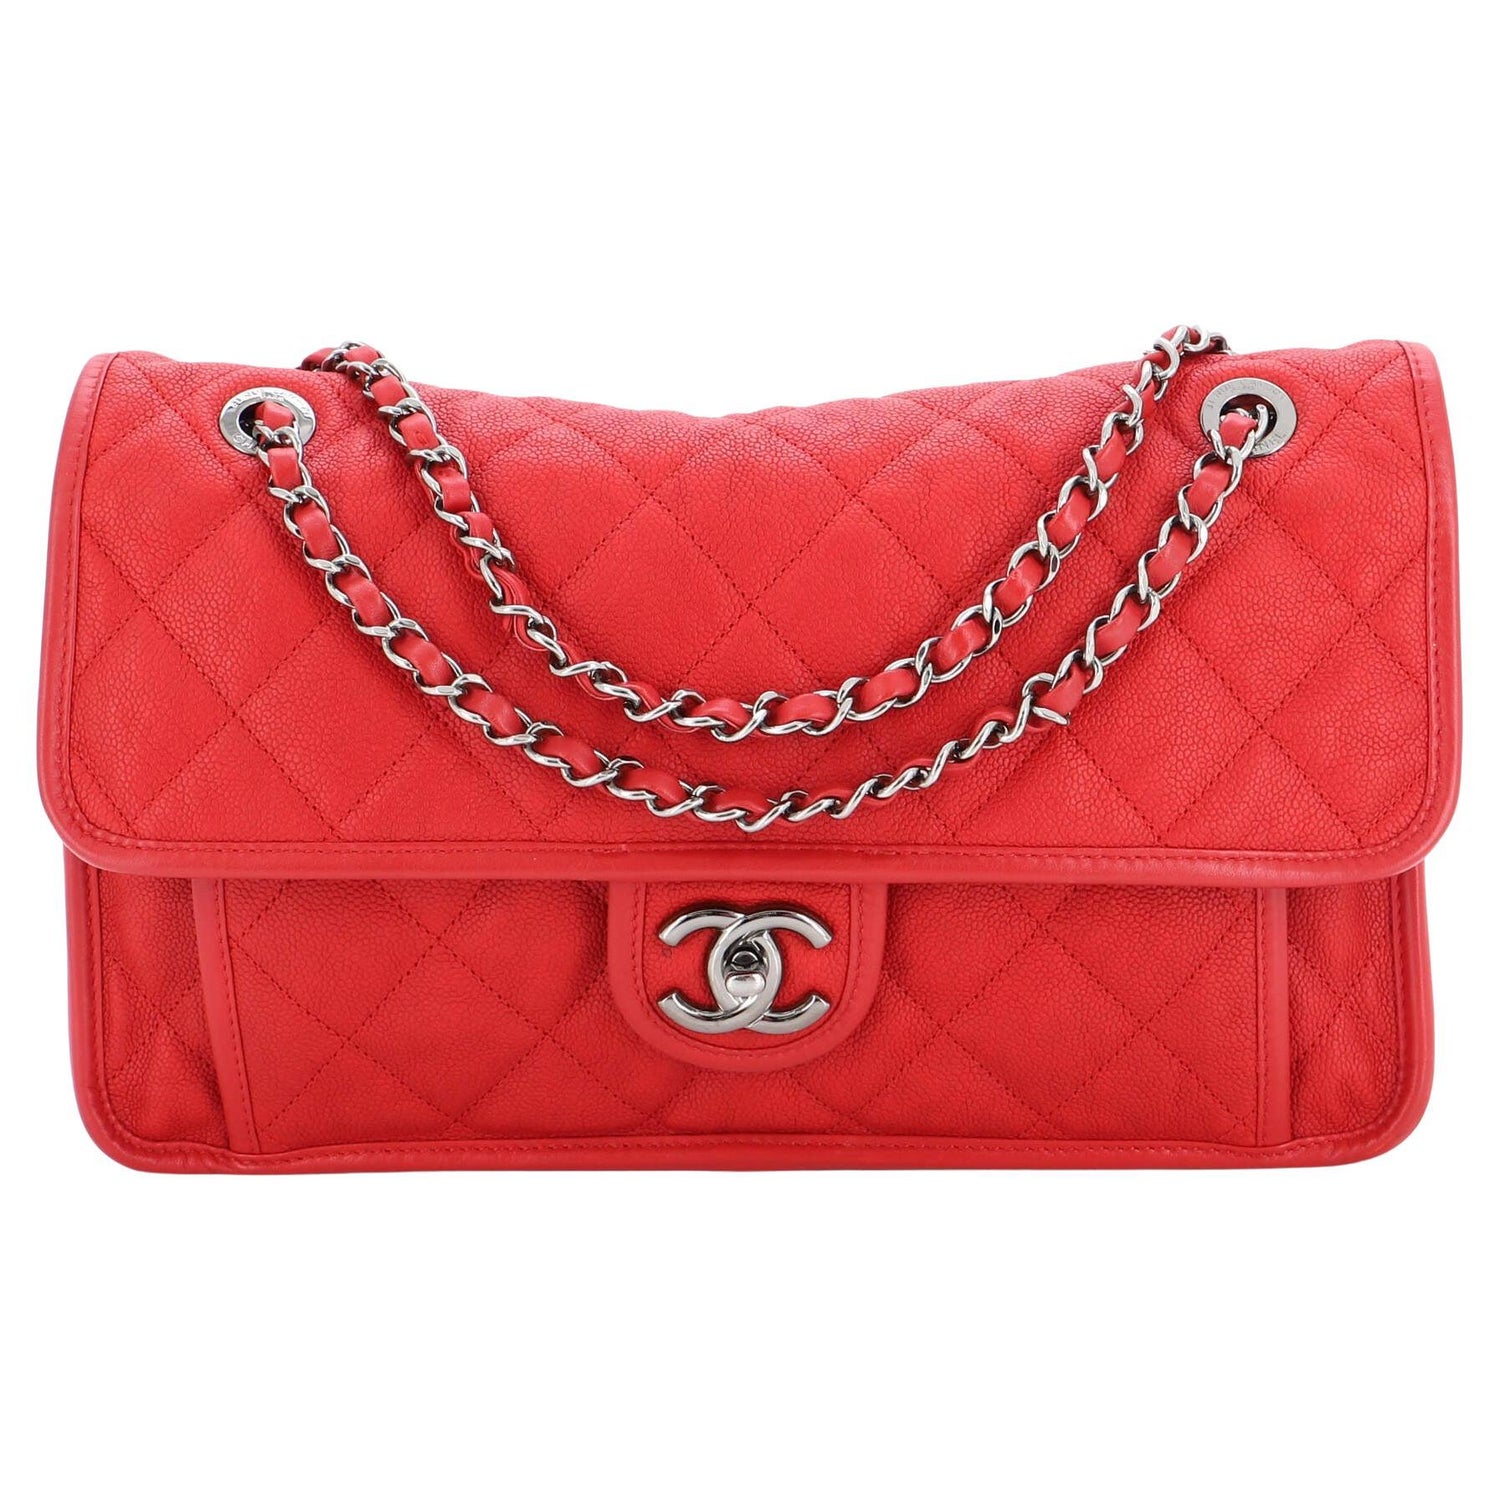 Chanel Caviar Quilted Leather Bag - 372 For Sale on 1stDibs  caviar  quilted chanel bag, chanel quilted caviar bag, quilted caviar chanel